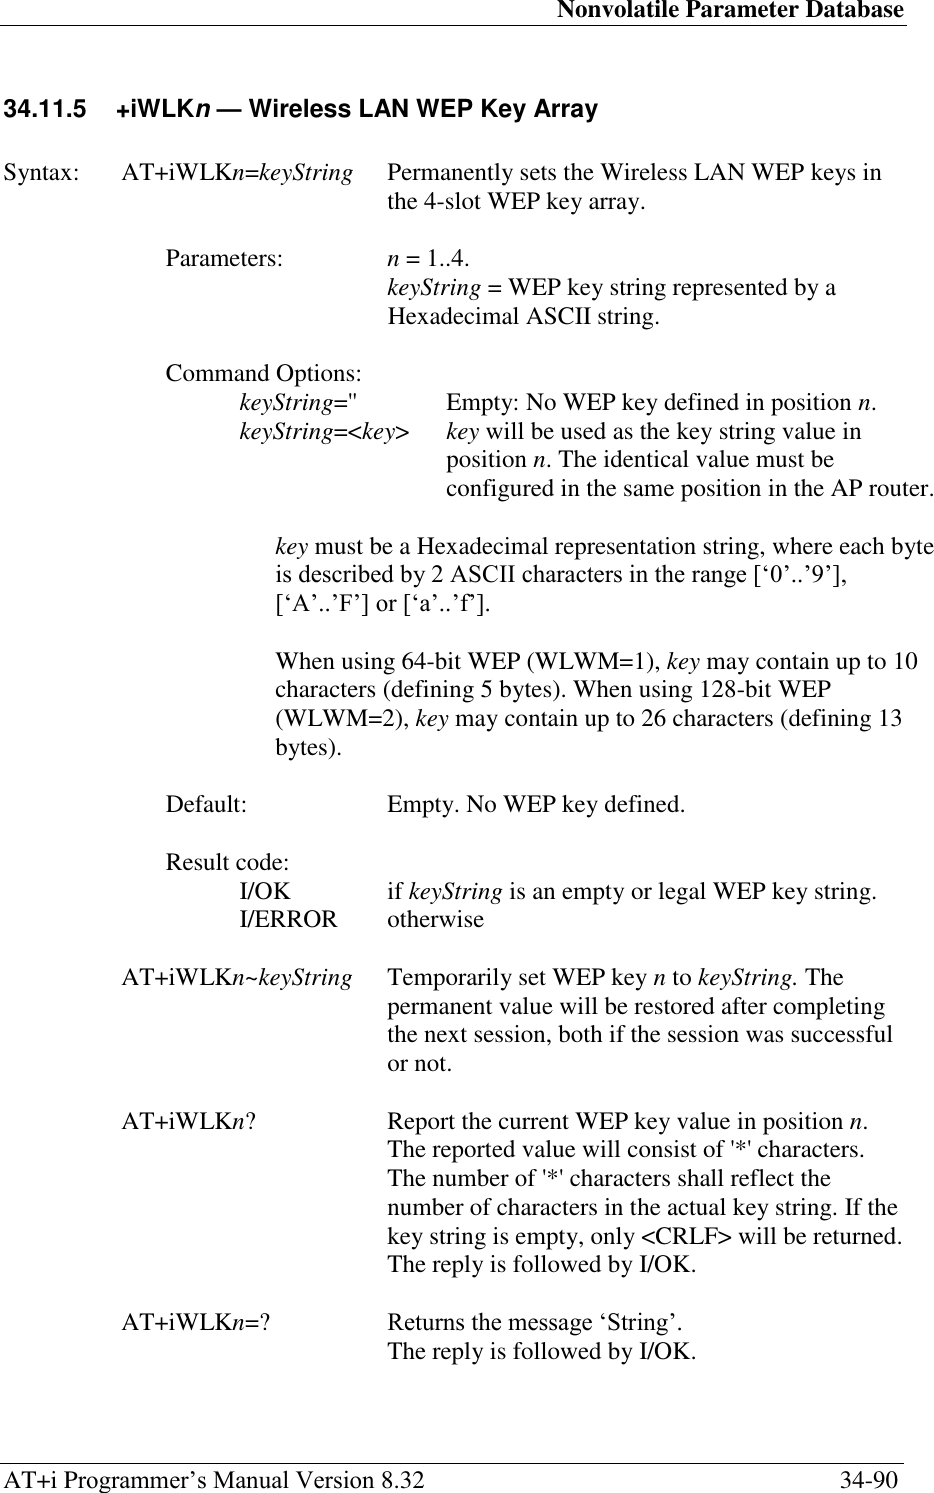 Nonvolatile Parameter Database AT+i Programmer‘s Manual Version 8.32  34-90 34.11.5  +iWLKn — Wireless LAN WEP Key Array   Syntax:  AT+iWLKn=keyString  Permanently sets the Wireless LAN WEP keys in the 4-slot WEP key array.  Parameters:  n = 1..4.  keyString = WEP key string represented by a Hexadecimal ASCII string.  Command Options: keyString=&apos;&apos;  Empty: No WEP key defined in position n. keyString=&lt;key&gt;  key will be used as the key string value in position n. The identical value must be configured in the same position in the AP router.  key must be a Hexadecimal representation string, where each byte is described by 2 ASCII characters in the range [‗0‘..‘9‘], [‗A‘..‘F‘] or [‗a‘..‘f‘].  When using 64-bit WEP (WLWM=1), key may contain up to 10 characters (defining 5 bytes). When using 128-bit WEP (WLWM=2), key may contain up to 26 characters (defining 13 bytes).  Default:  Empty. No WEP key defined.  Result code: I/OK  if keyString is an empty or legal WEP key string. I/ERROR   otherwise  AT+iWLKn~keyString  Temporarily set WEP key n to keyString. The permanent value will be restored after completing the next session, both if the session was successful or not.  AT+iWLKn?  Report the current WEP key value in position n. The reported value will consist of &apos;*&apos; characters. The number of &apos;*&apos; characters shall reflect the number of characters in the actual key string. If the key string is empty, only &lt;CRLF&gt; will be returned.   The reply is followed by I/OK.  AT+iWLKn=? Returns the message ‗String‘.   The reply is followed by I/OK. 